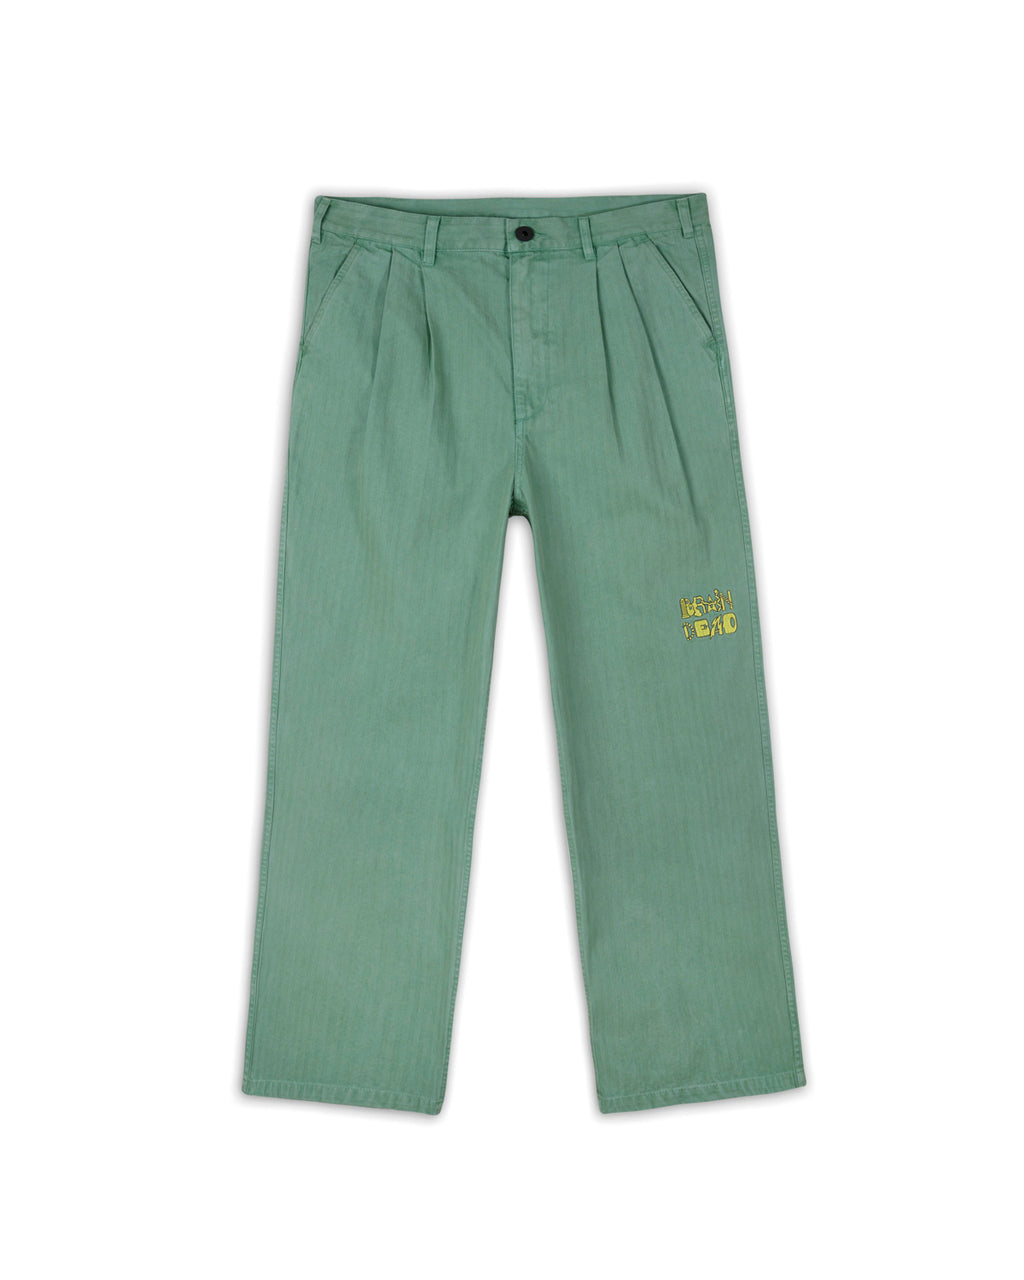 Connections Herringbone Pant - Putty